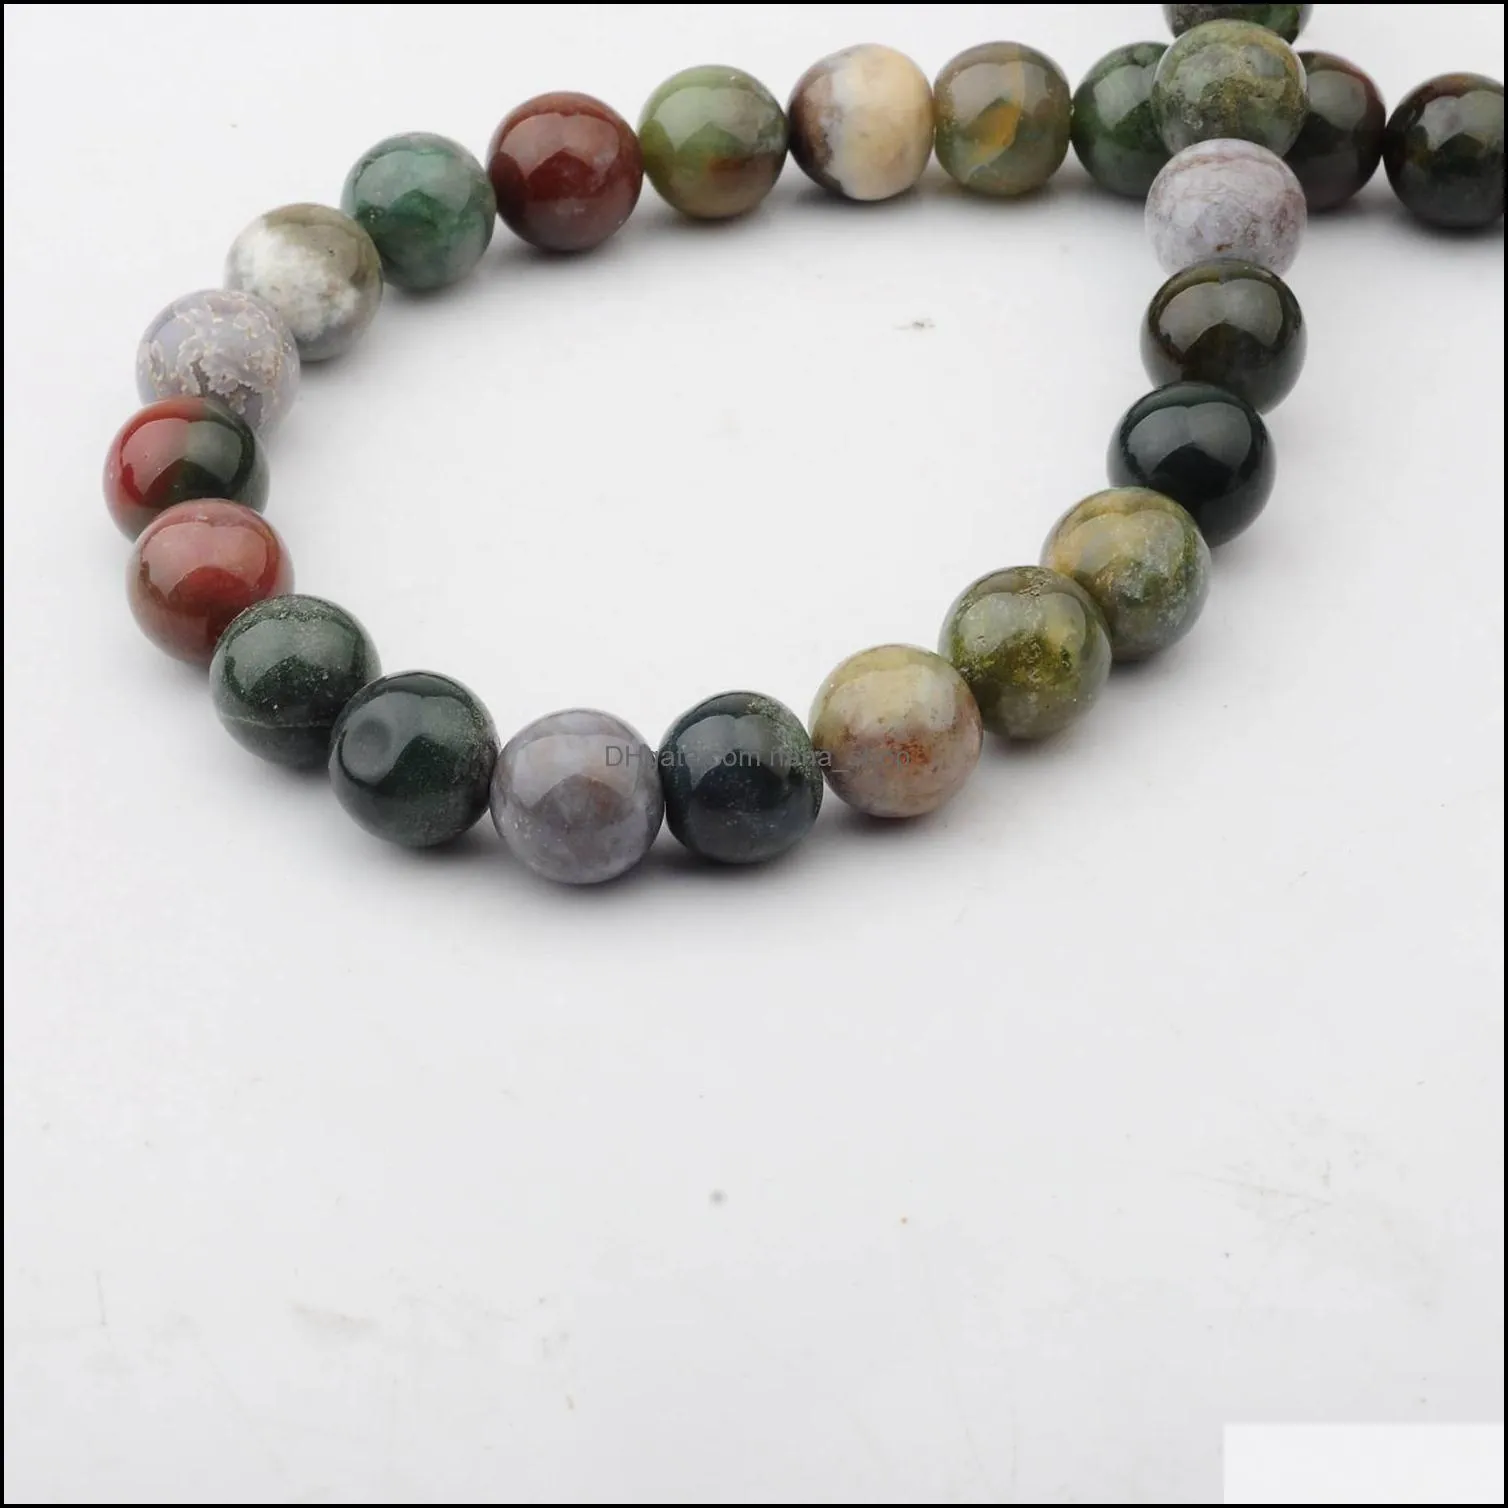 natural fancy jasper 14mm round beads for diy making charm jewelry necklace bracelet loose 28pcs stone indian agate beads for